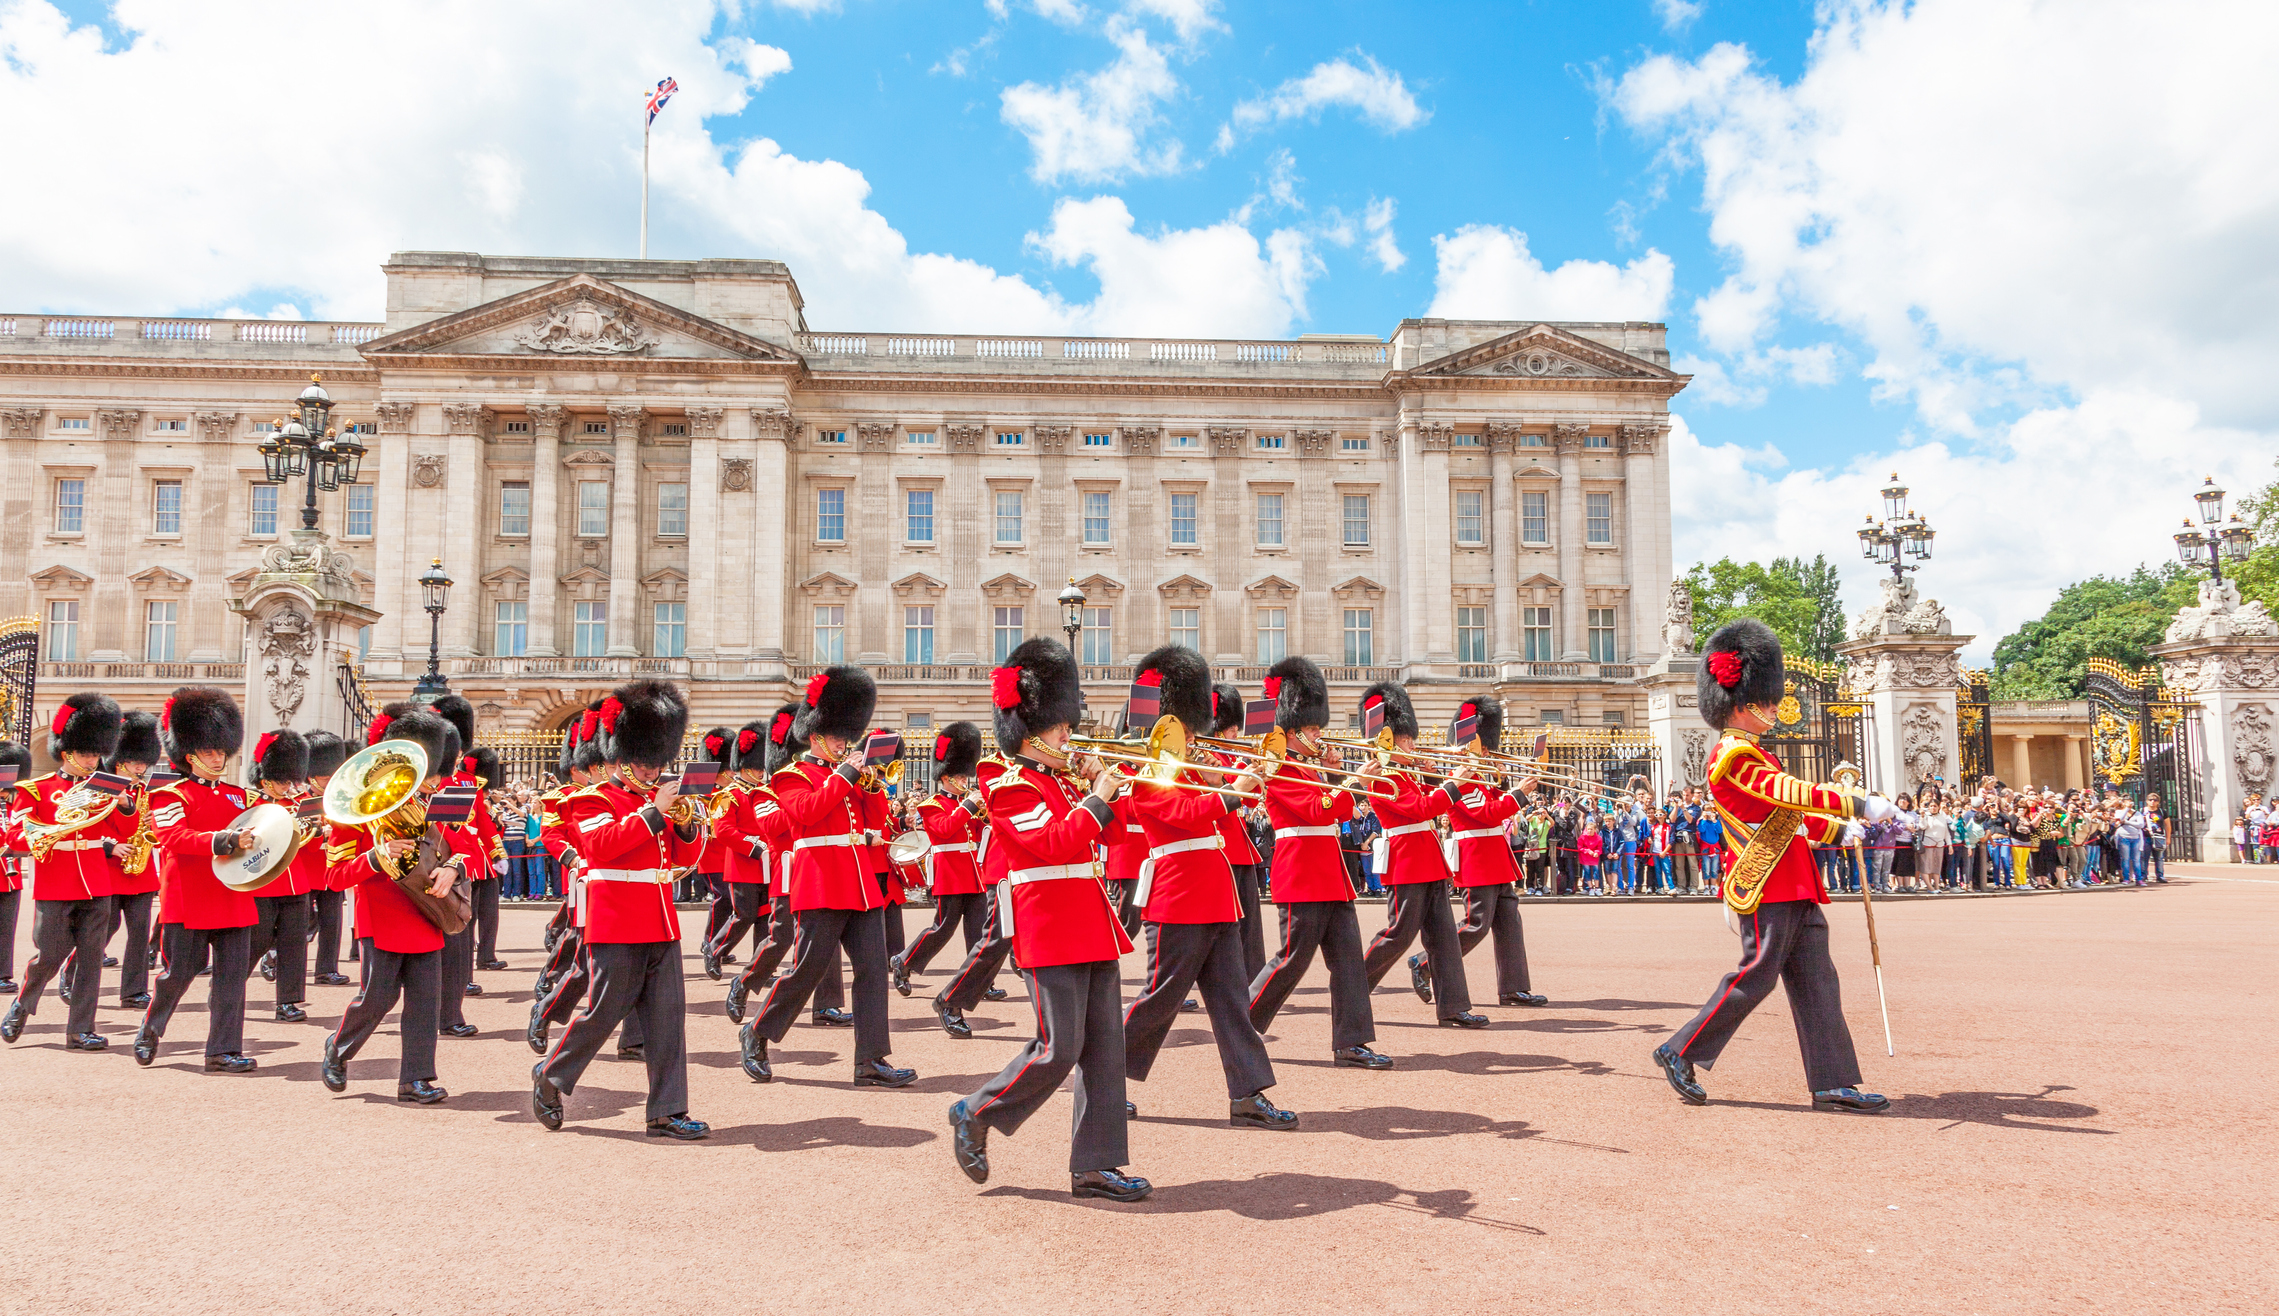 Buckingham Palace and the changing of the guard